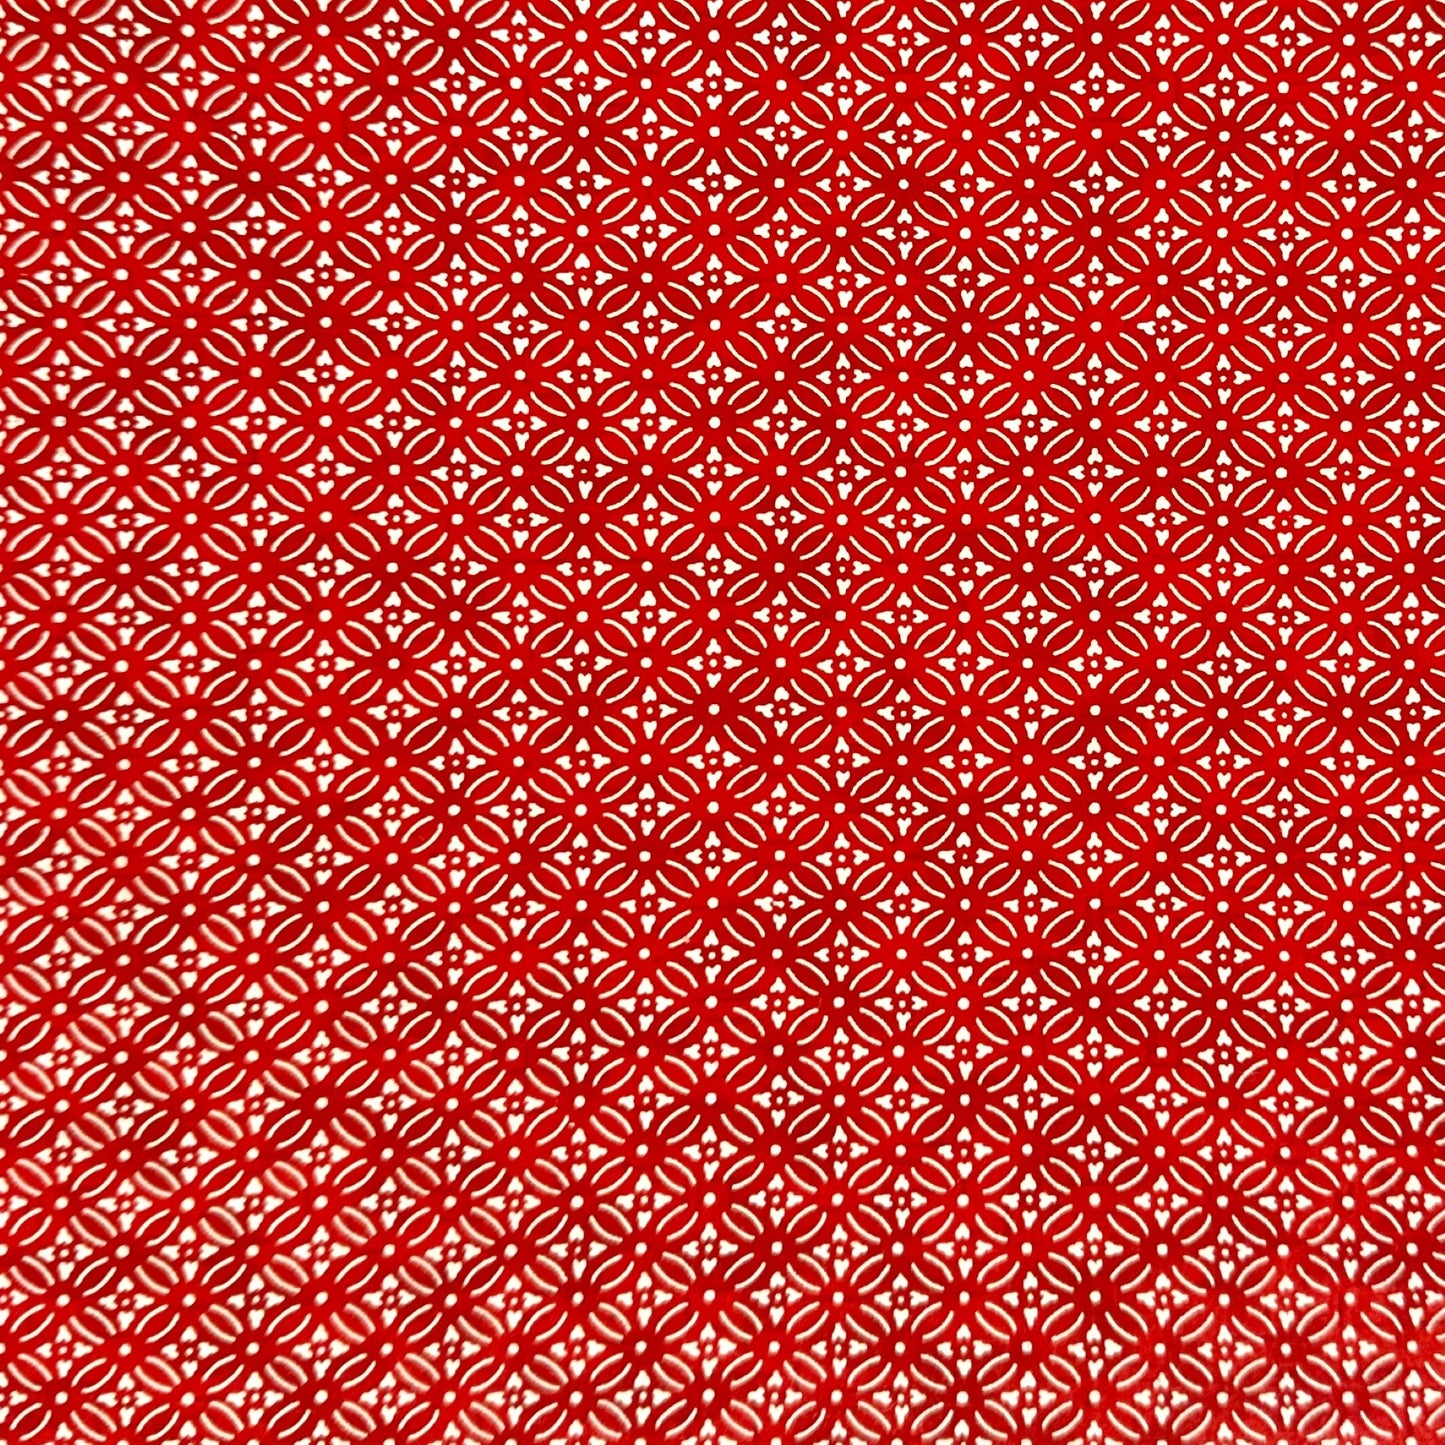 Japanese silkscreen chiyogami paper with a two-tone rich red geometric pattern on creamy white